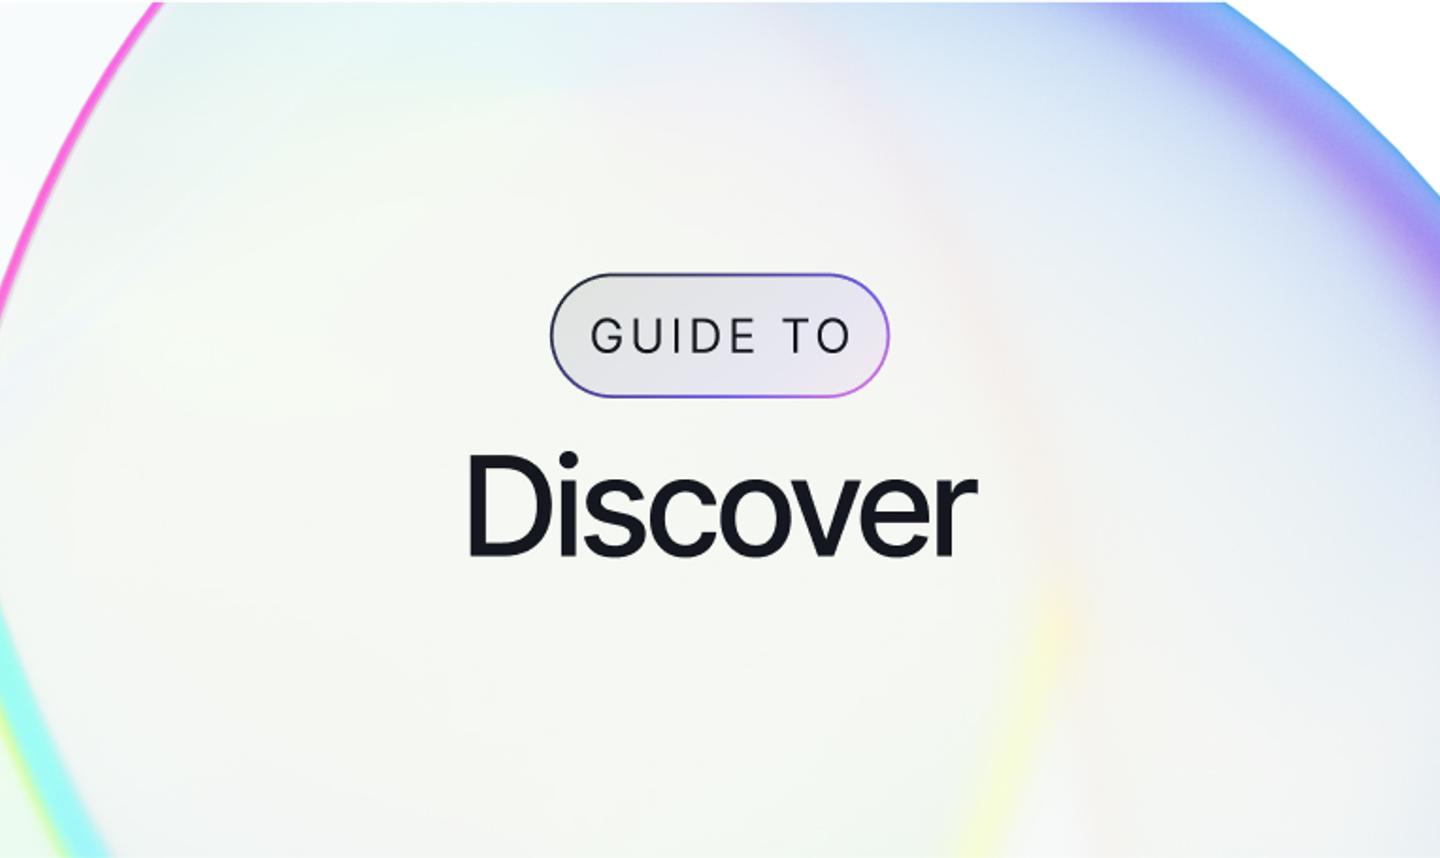 Guide to Discover